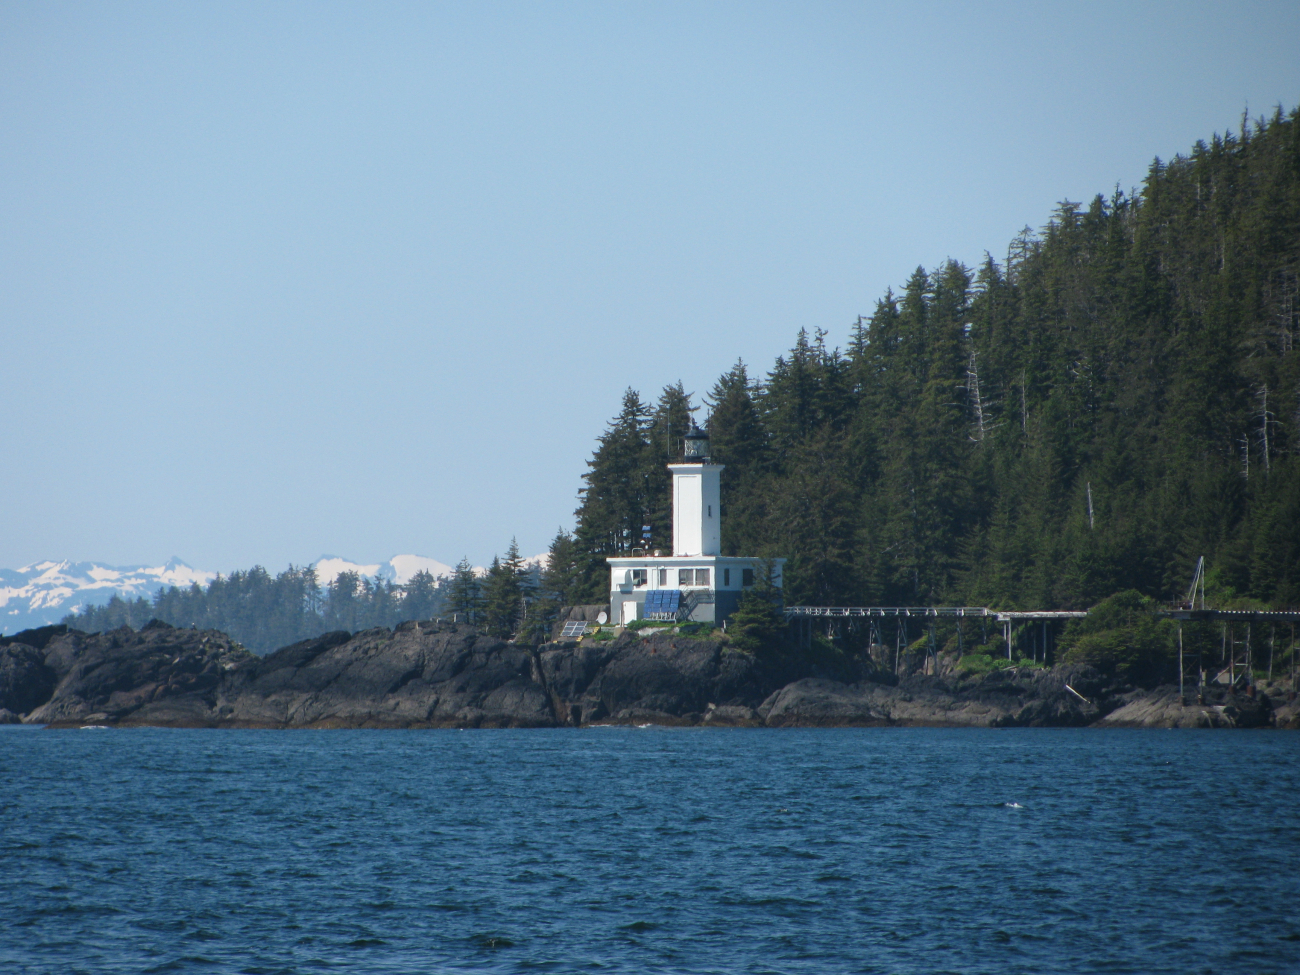 Cape Decision Lighthouse seen from offshore